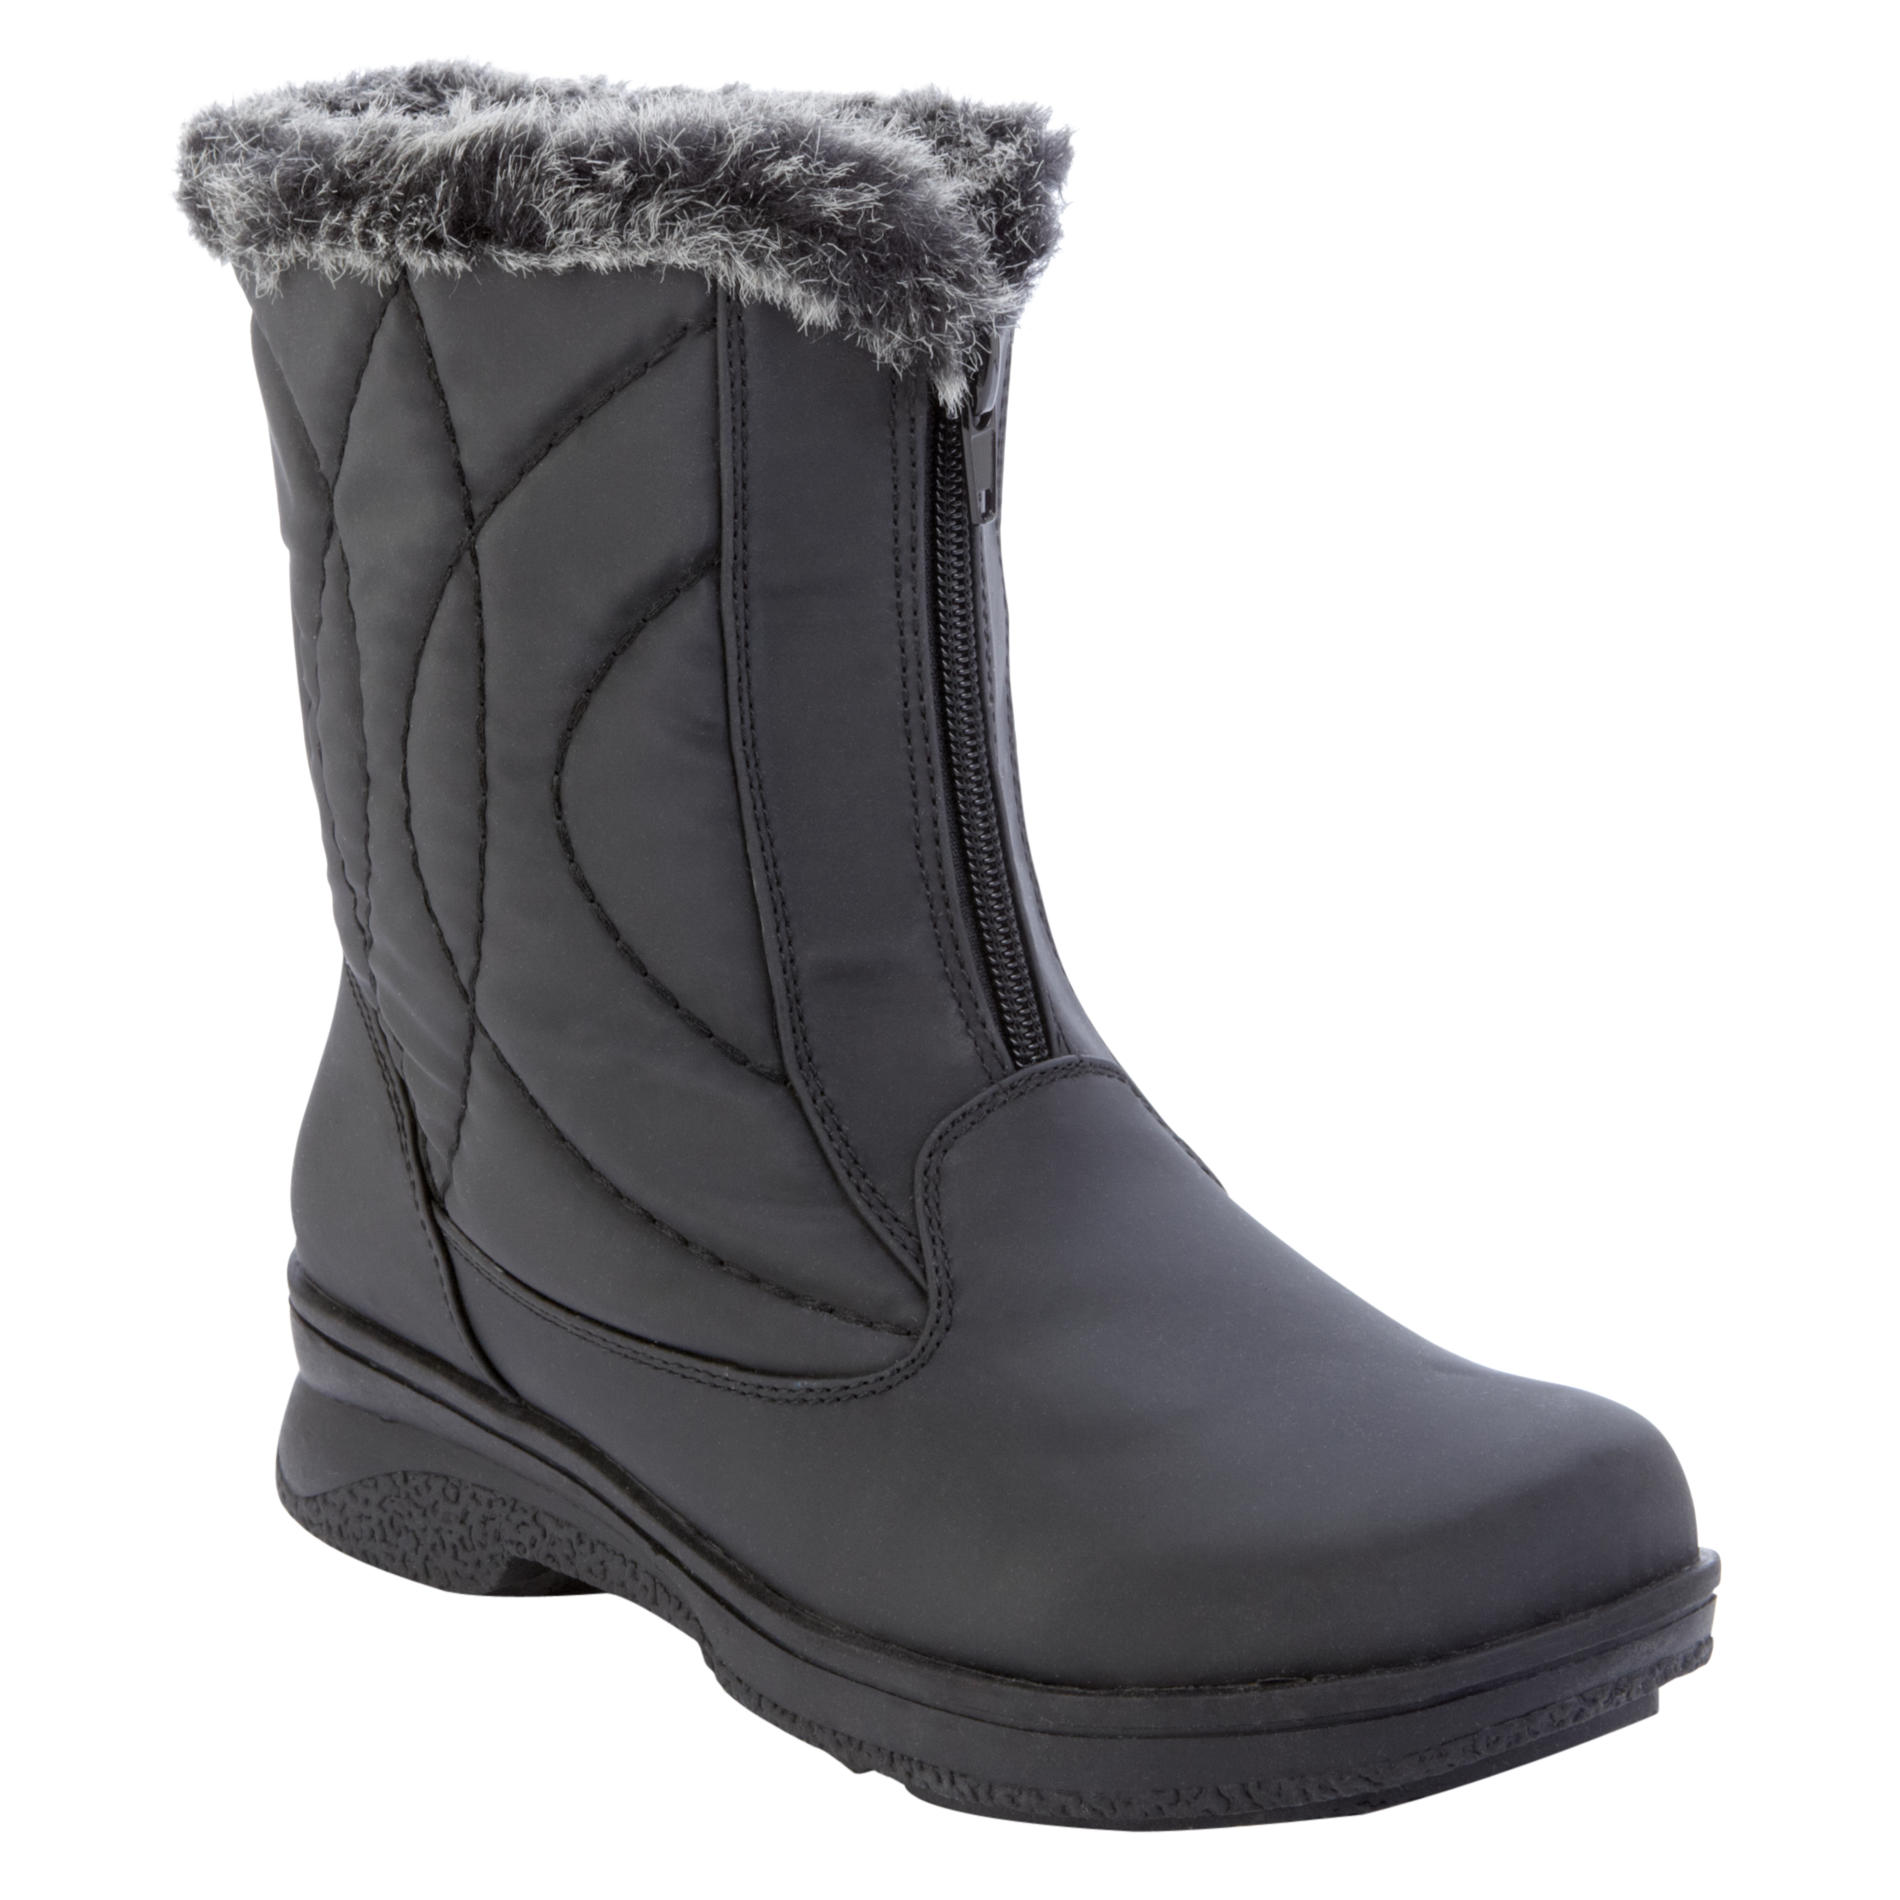 Athletech Women&#39;s Winter Boot Frosty Medium and Wide Width - Black - Shoes - Women&#39;s Shoes ...